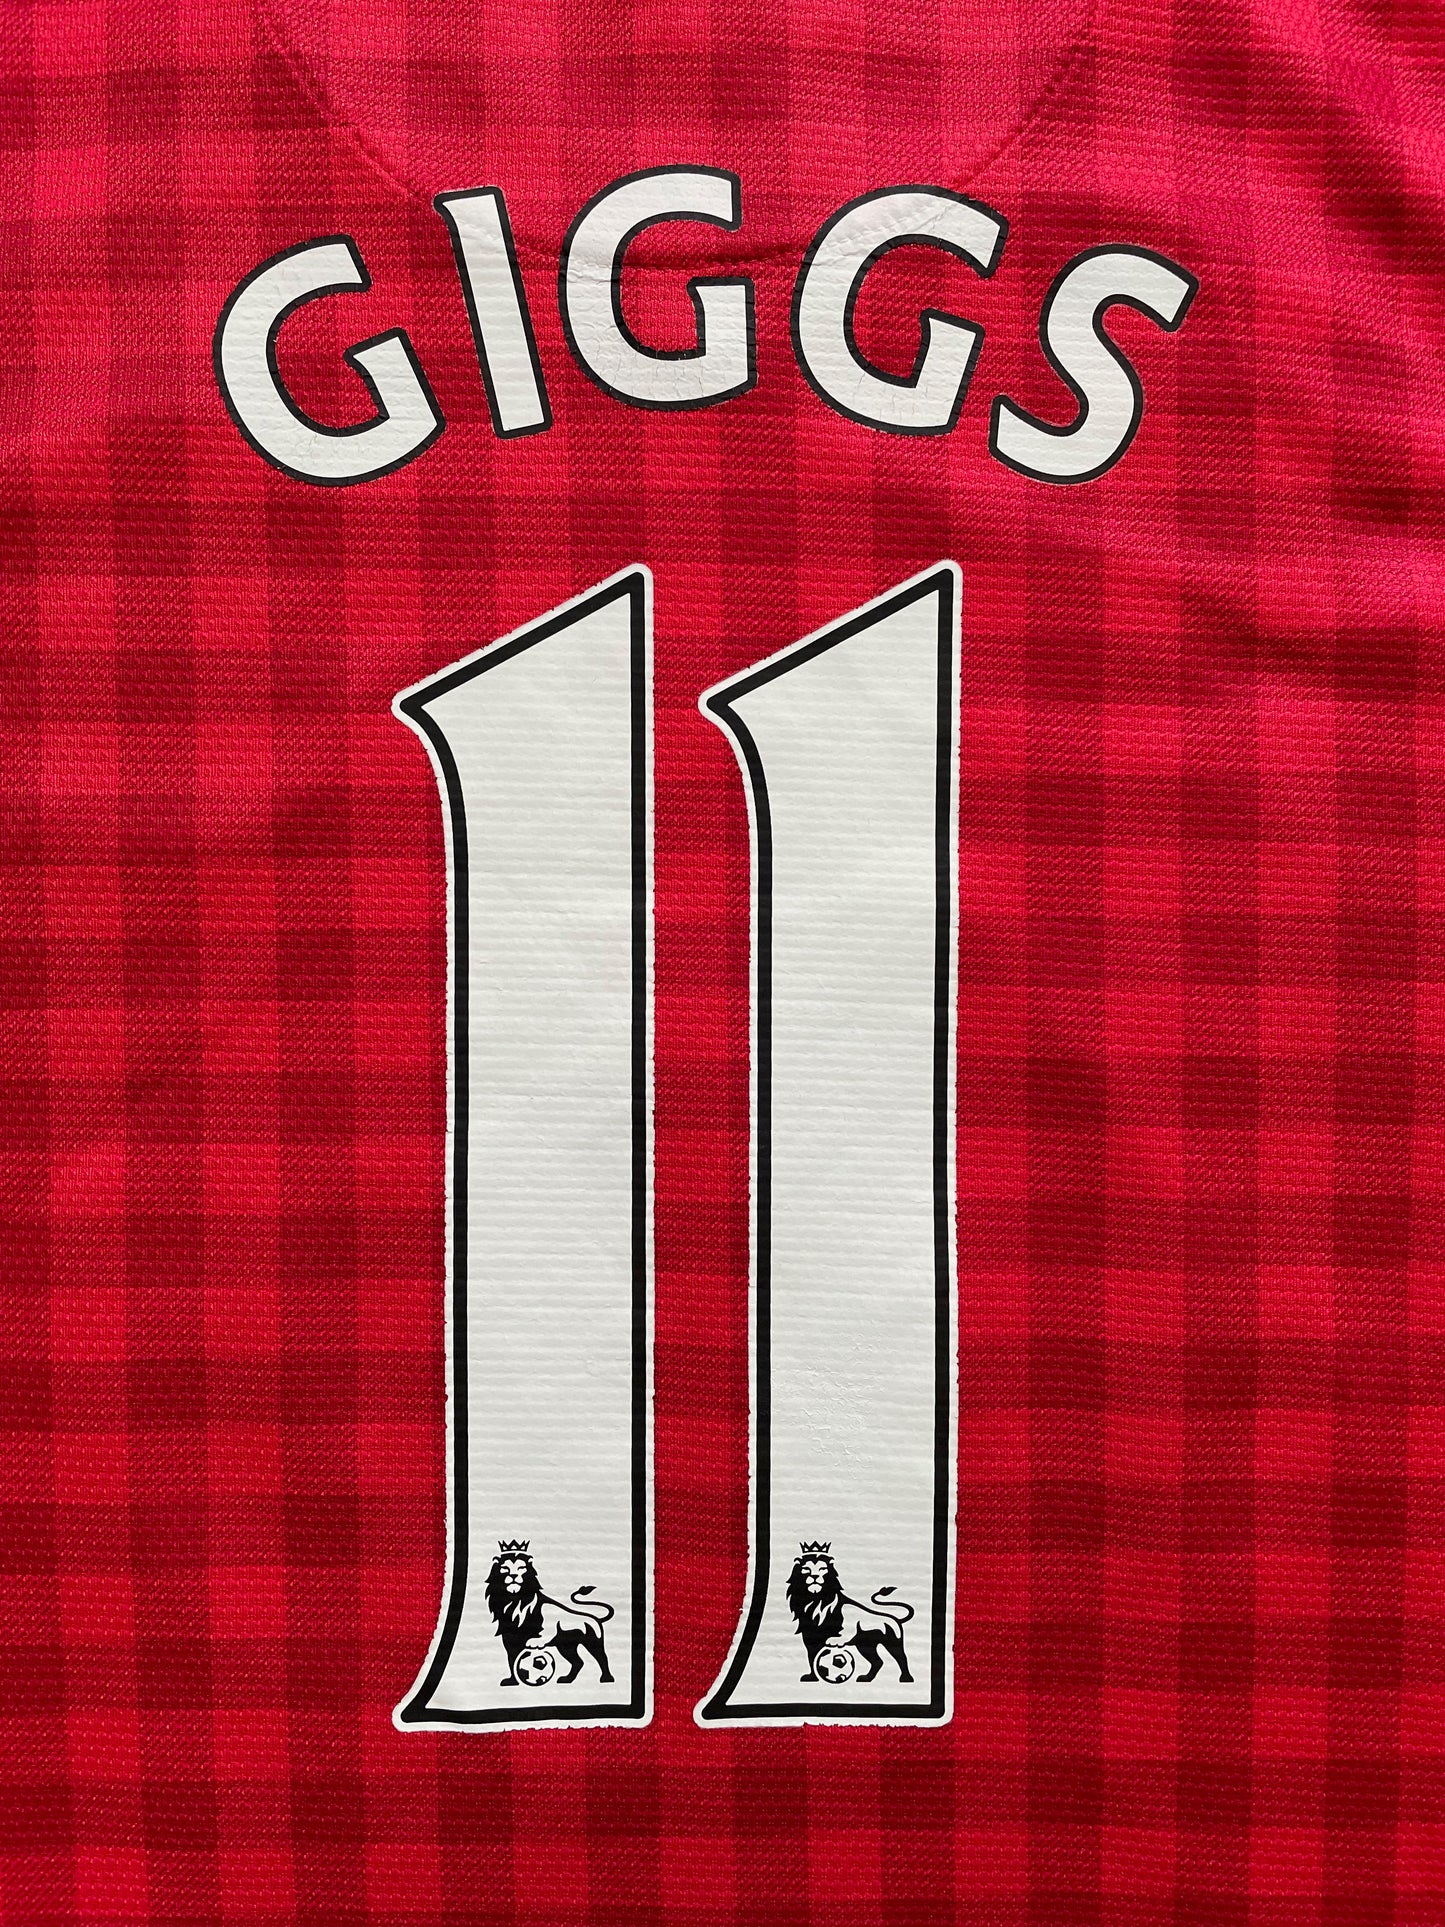 2012-2013 Manchester United FC home shirt #11 Giggs (L)